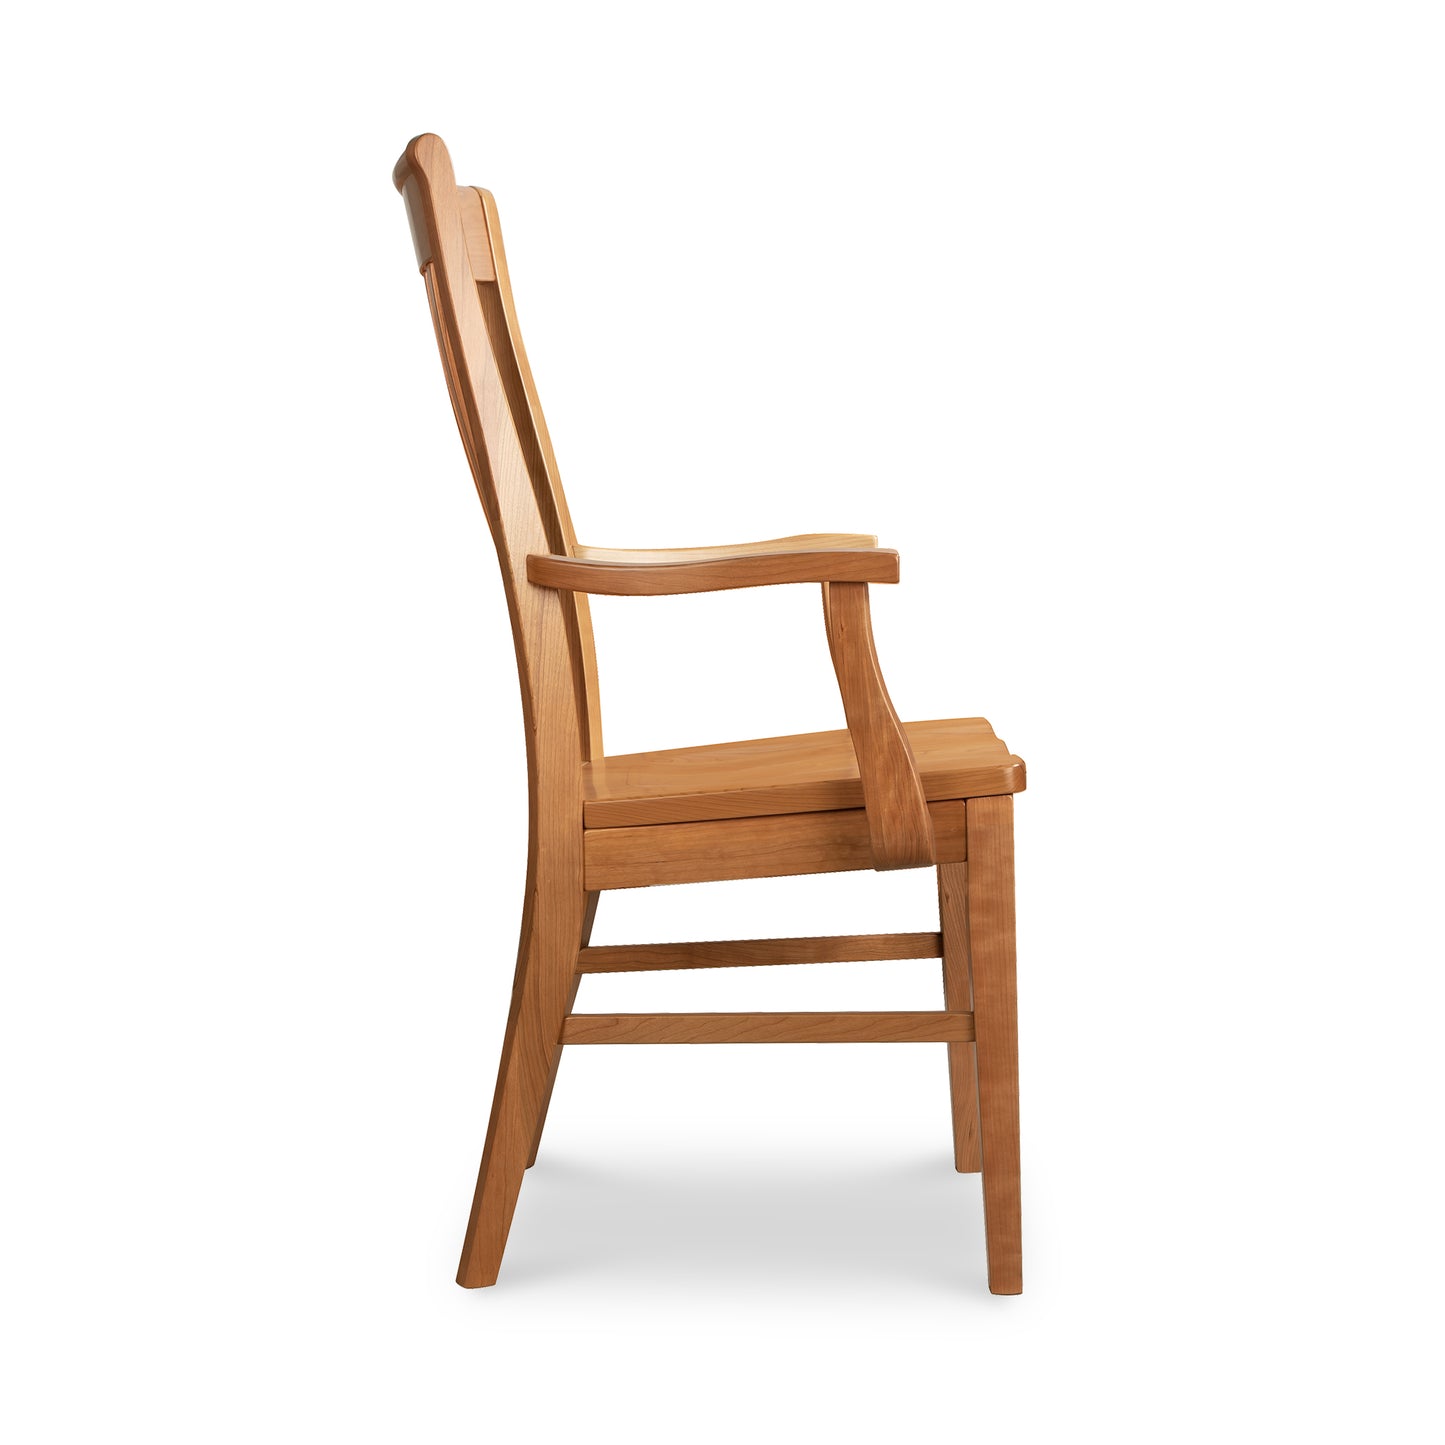 A wooden chair with a wooden seat and back.